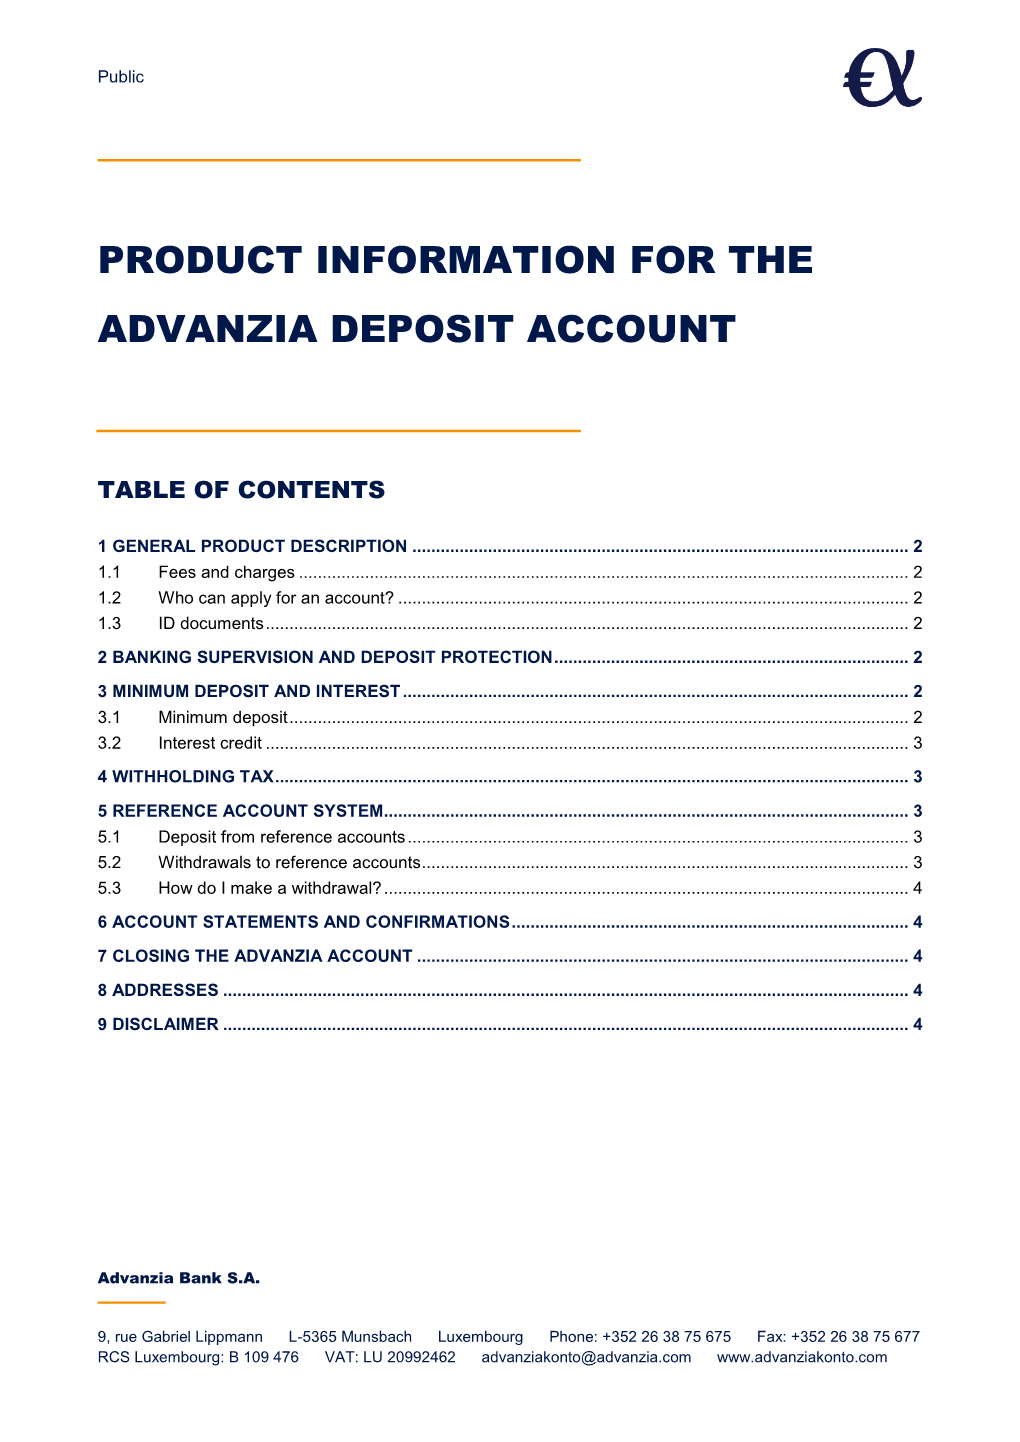 Product Information for the Advanzia Deposit Account